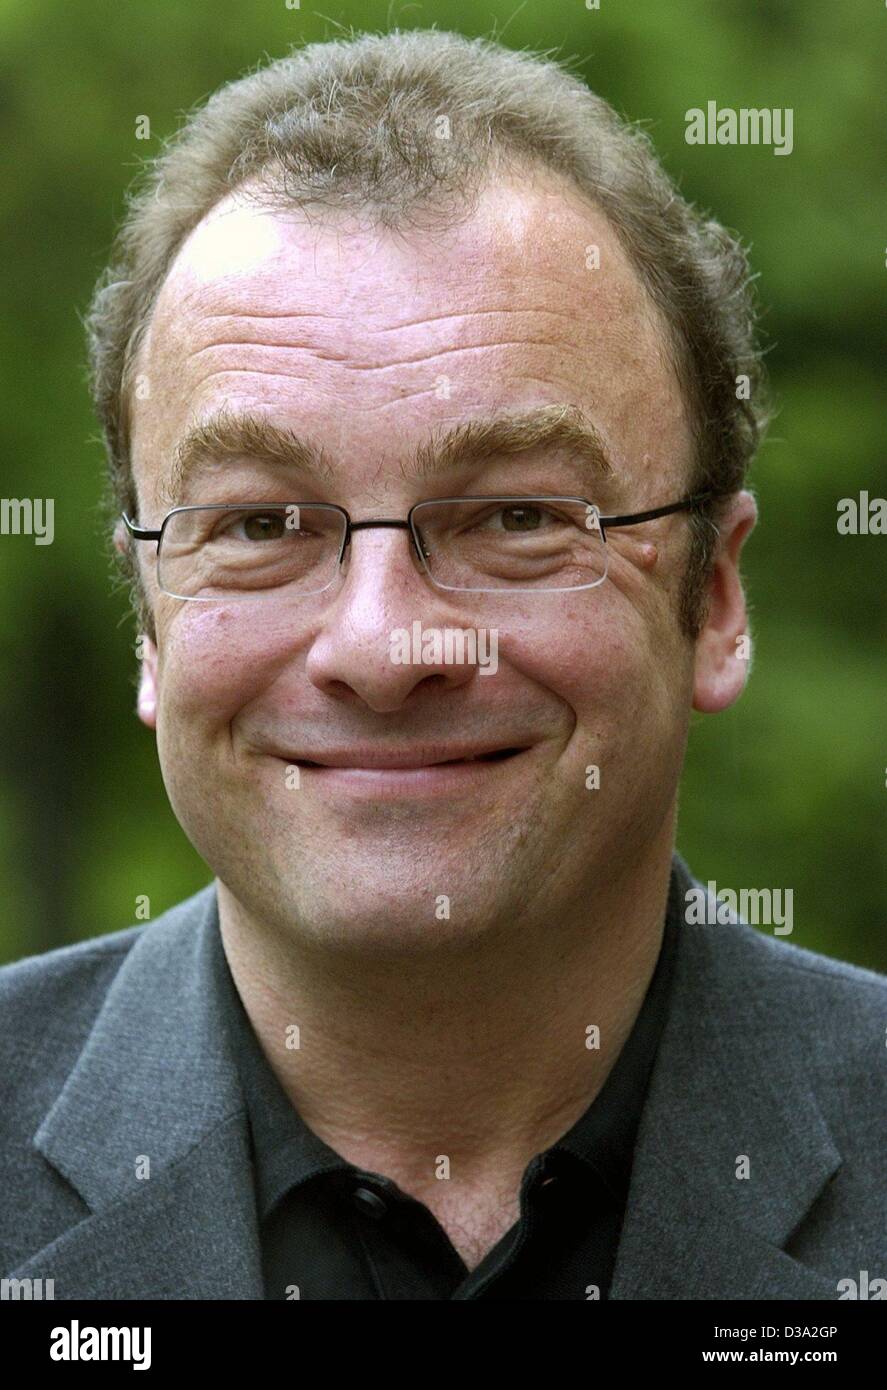 (dpa) - Robert Menasse, Austrian author, smiles in Berlin, 26 May 2002. Menasse received the 'Lion Feuchtwanger Award' for his novel 'Expulsion From Hell'. He was born in Vienna, 1952. Stock Photo